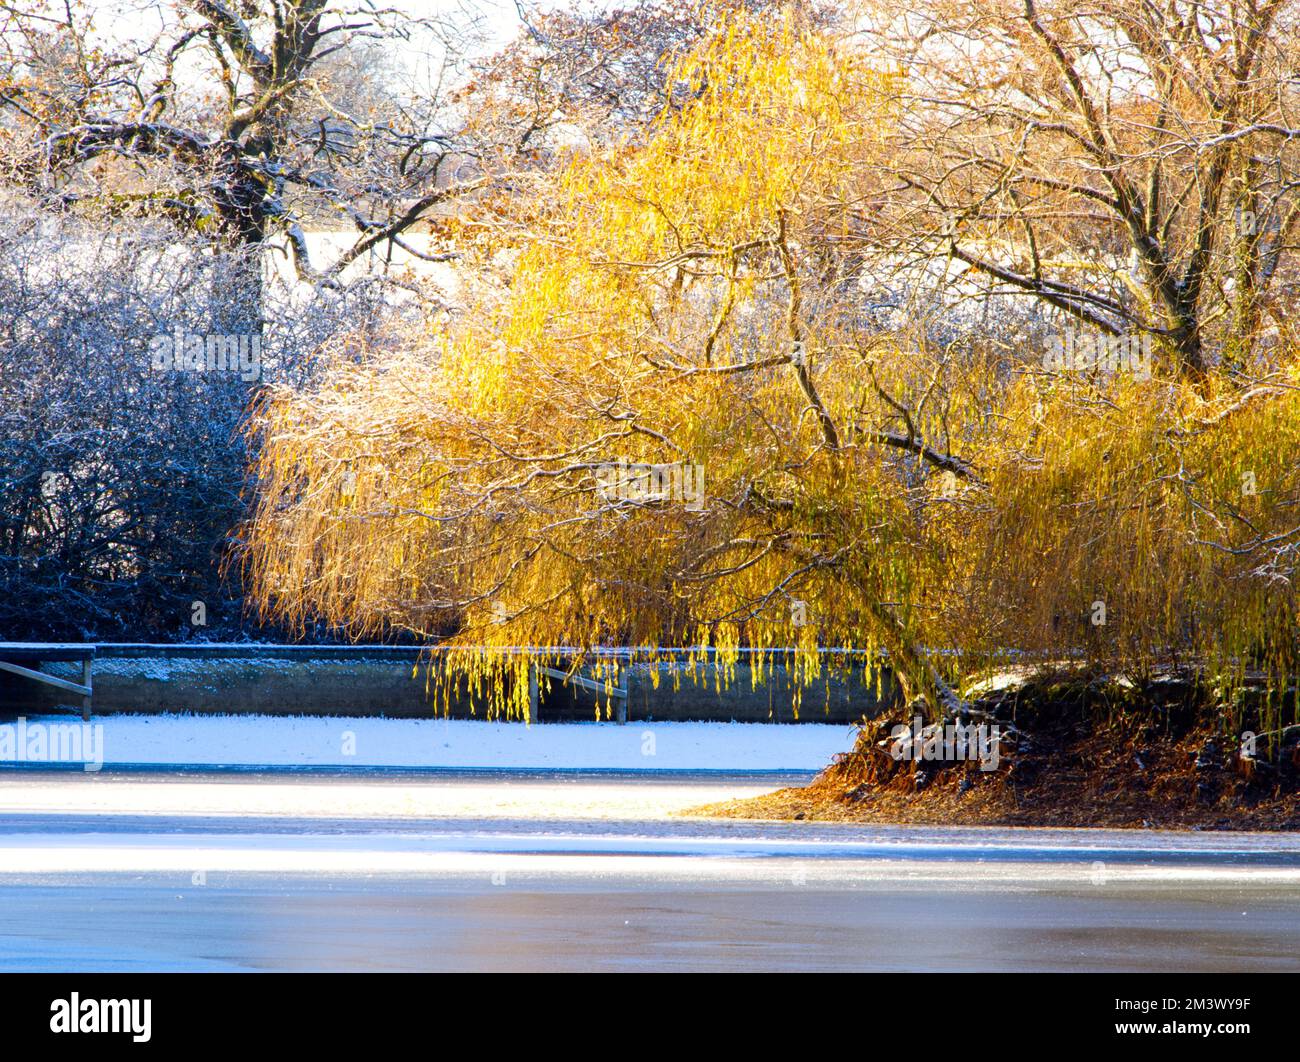 willows on island in frozen reservoir Stock Photo